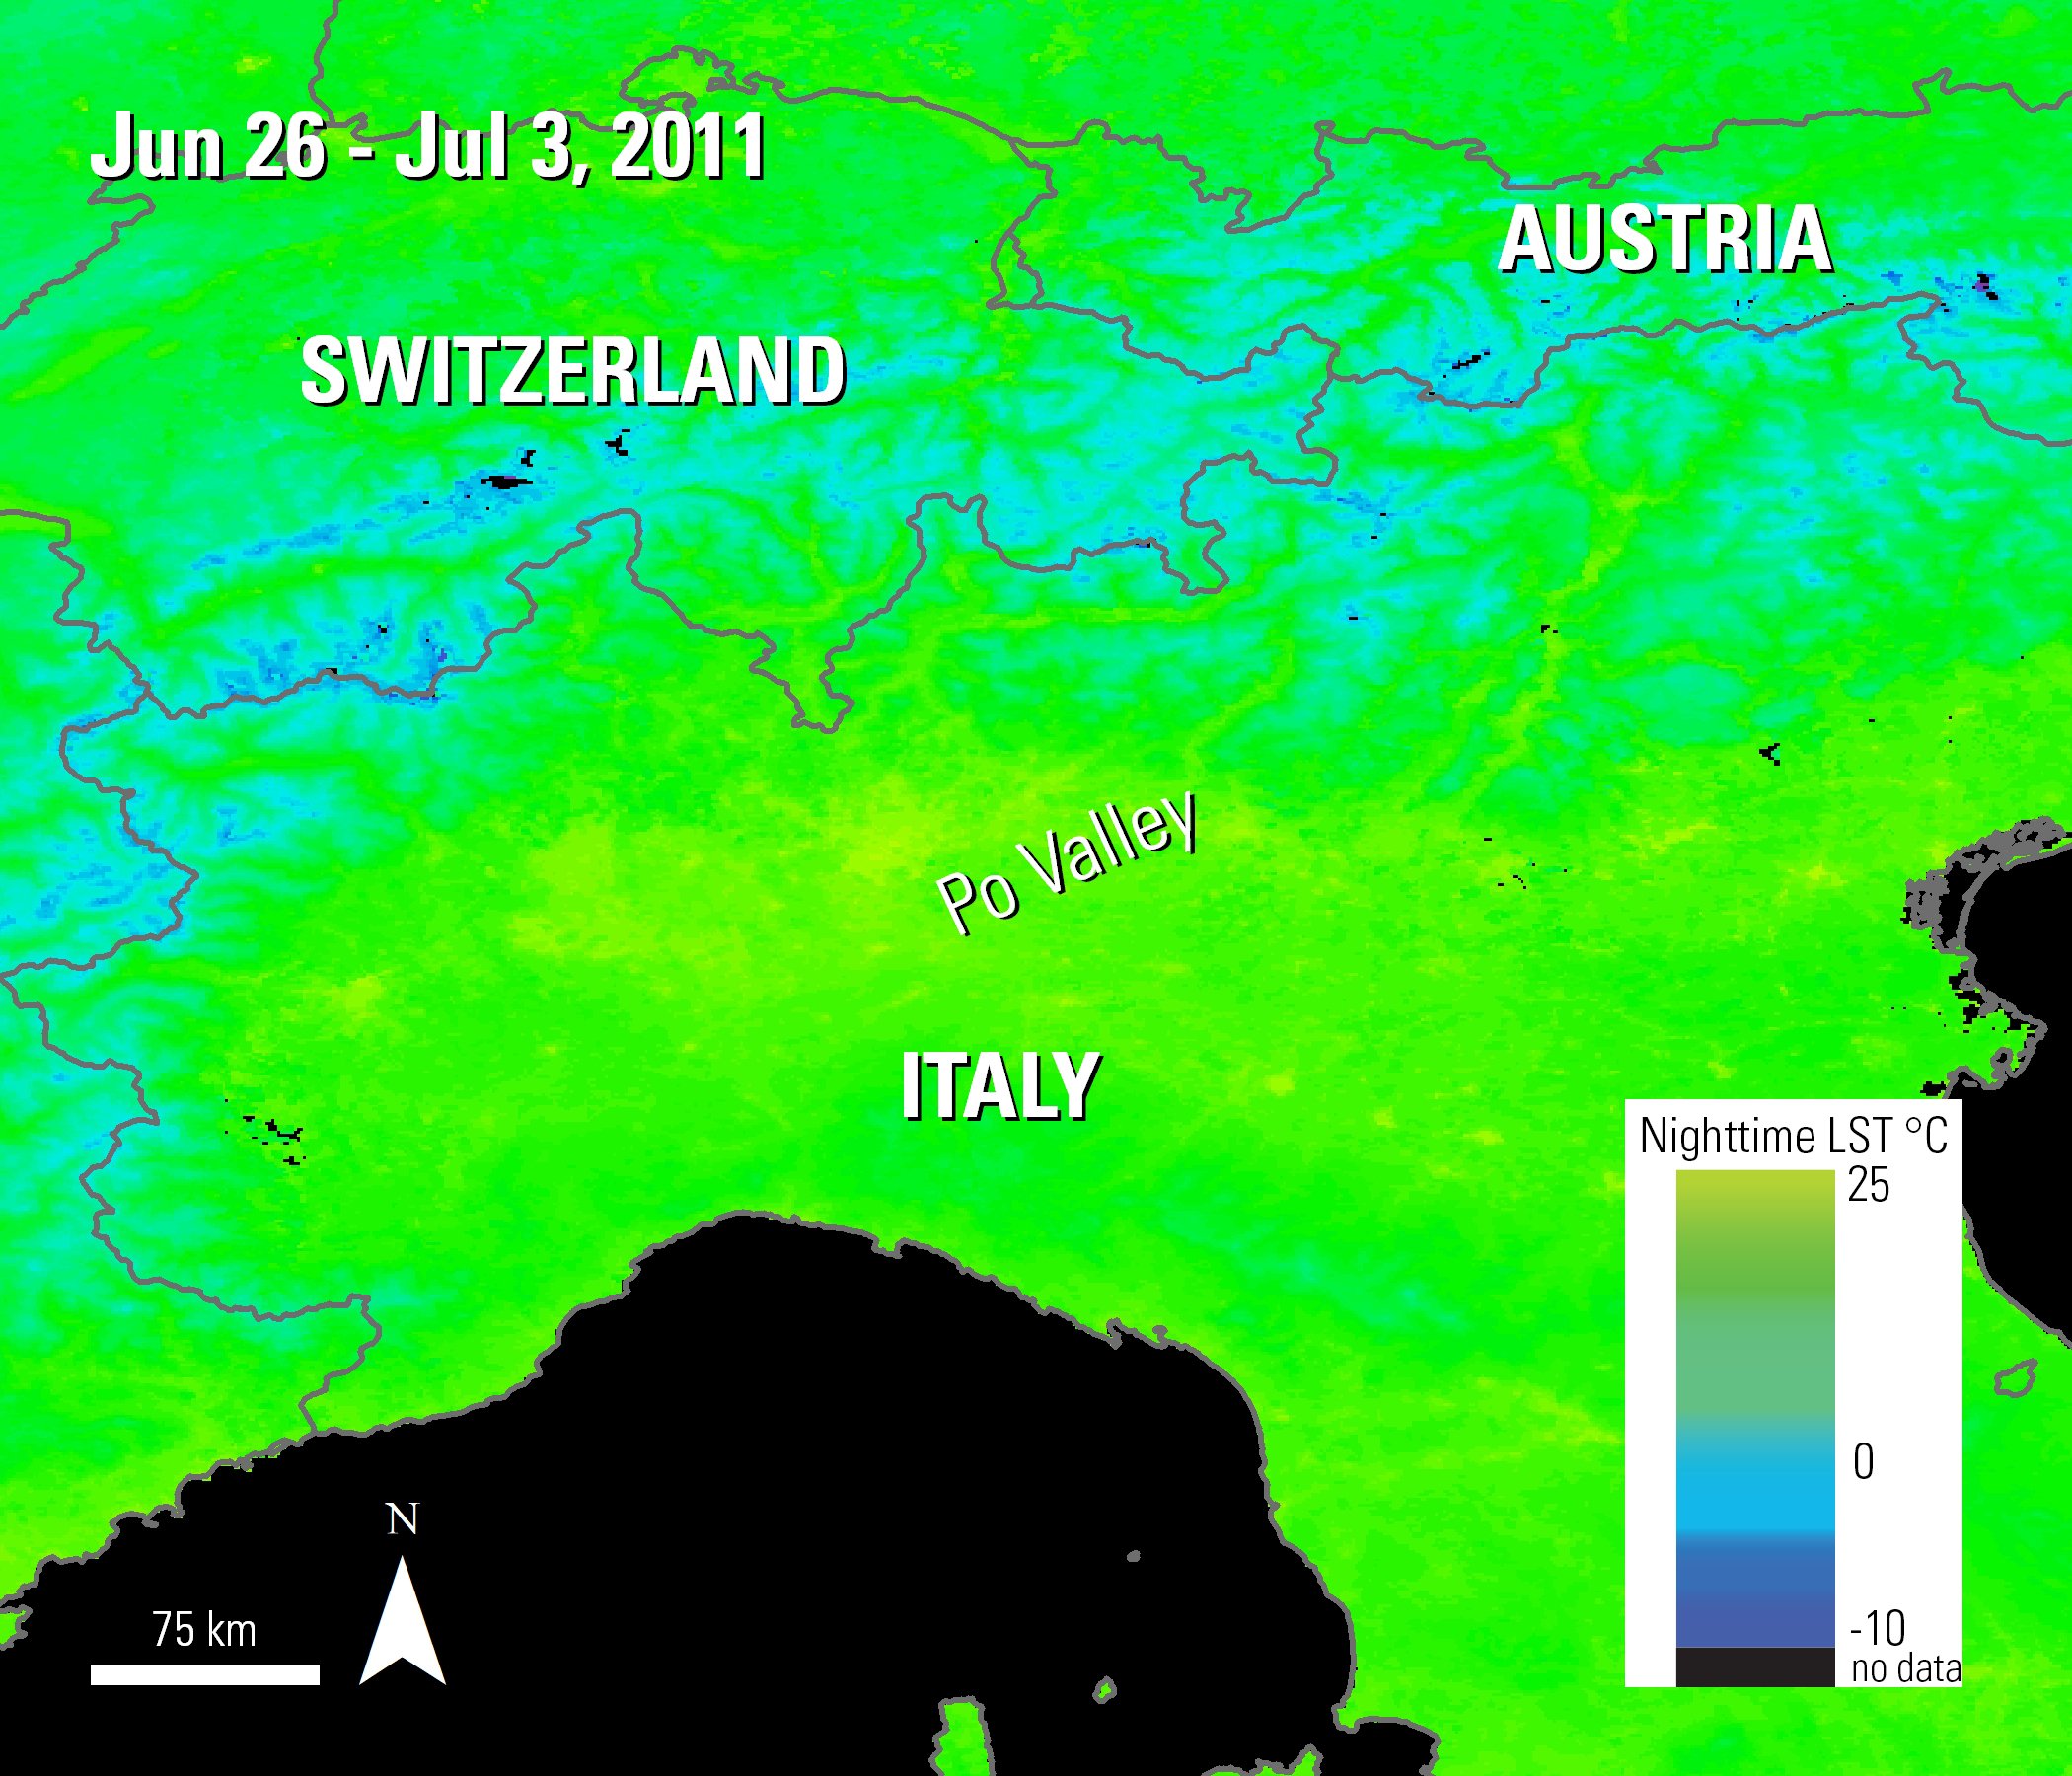 A map showing nighttime temperatures over the Po Valley in Italy. Temperatures range from -10 to 25 degrees Celsius. Colder temperatures are shown as shades of blue, moderate as shades of green, and warmer as shades of yellow, which are near urban areas.